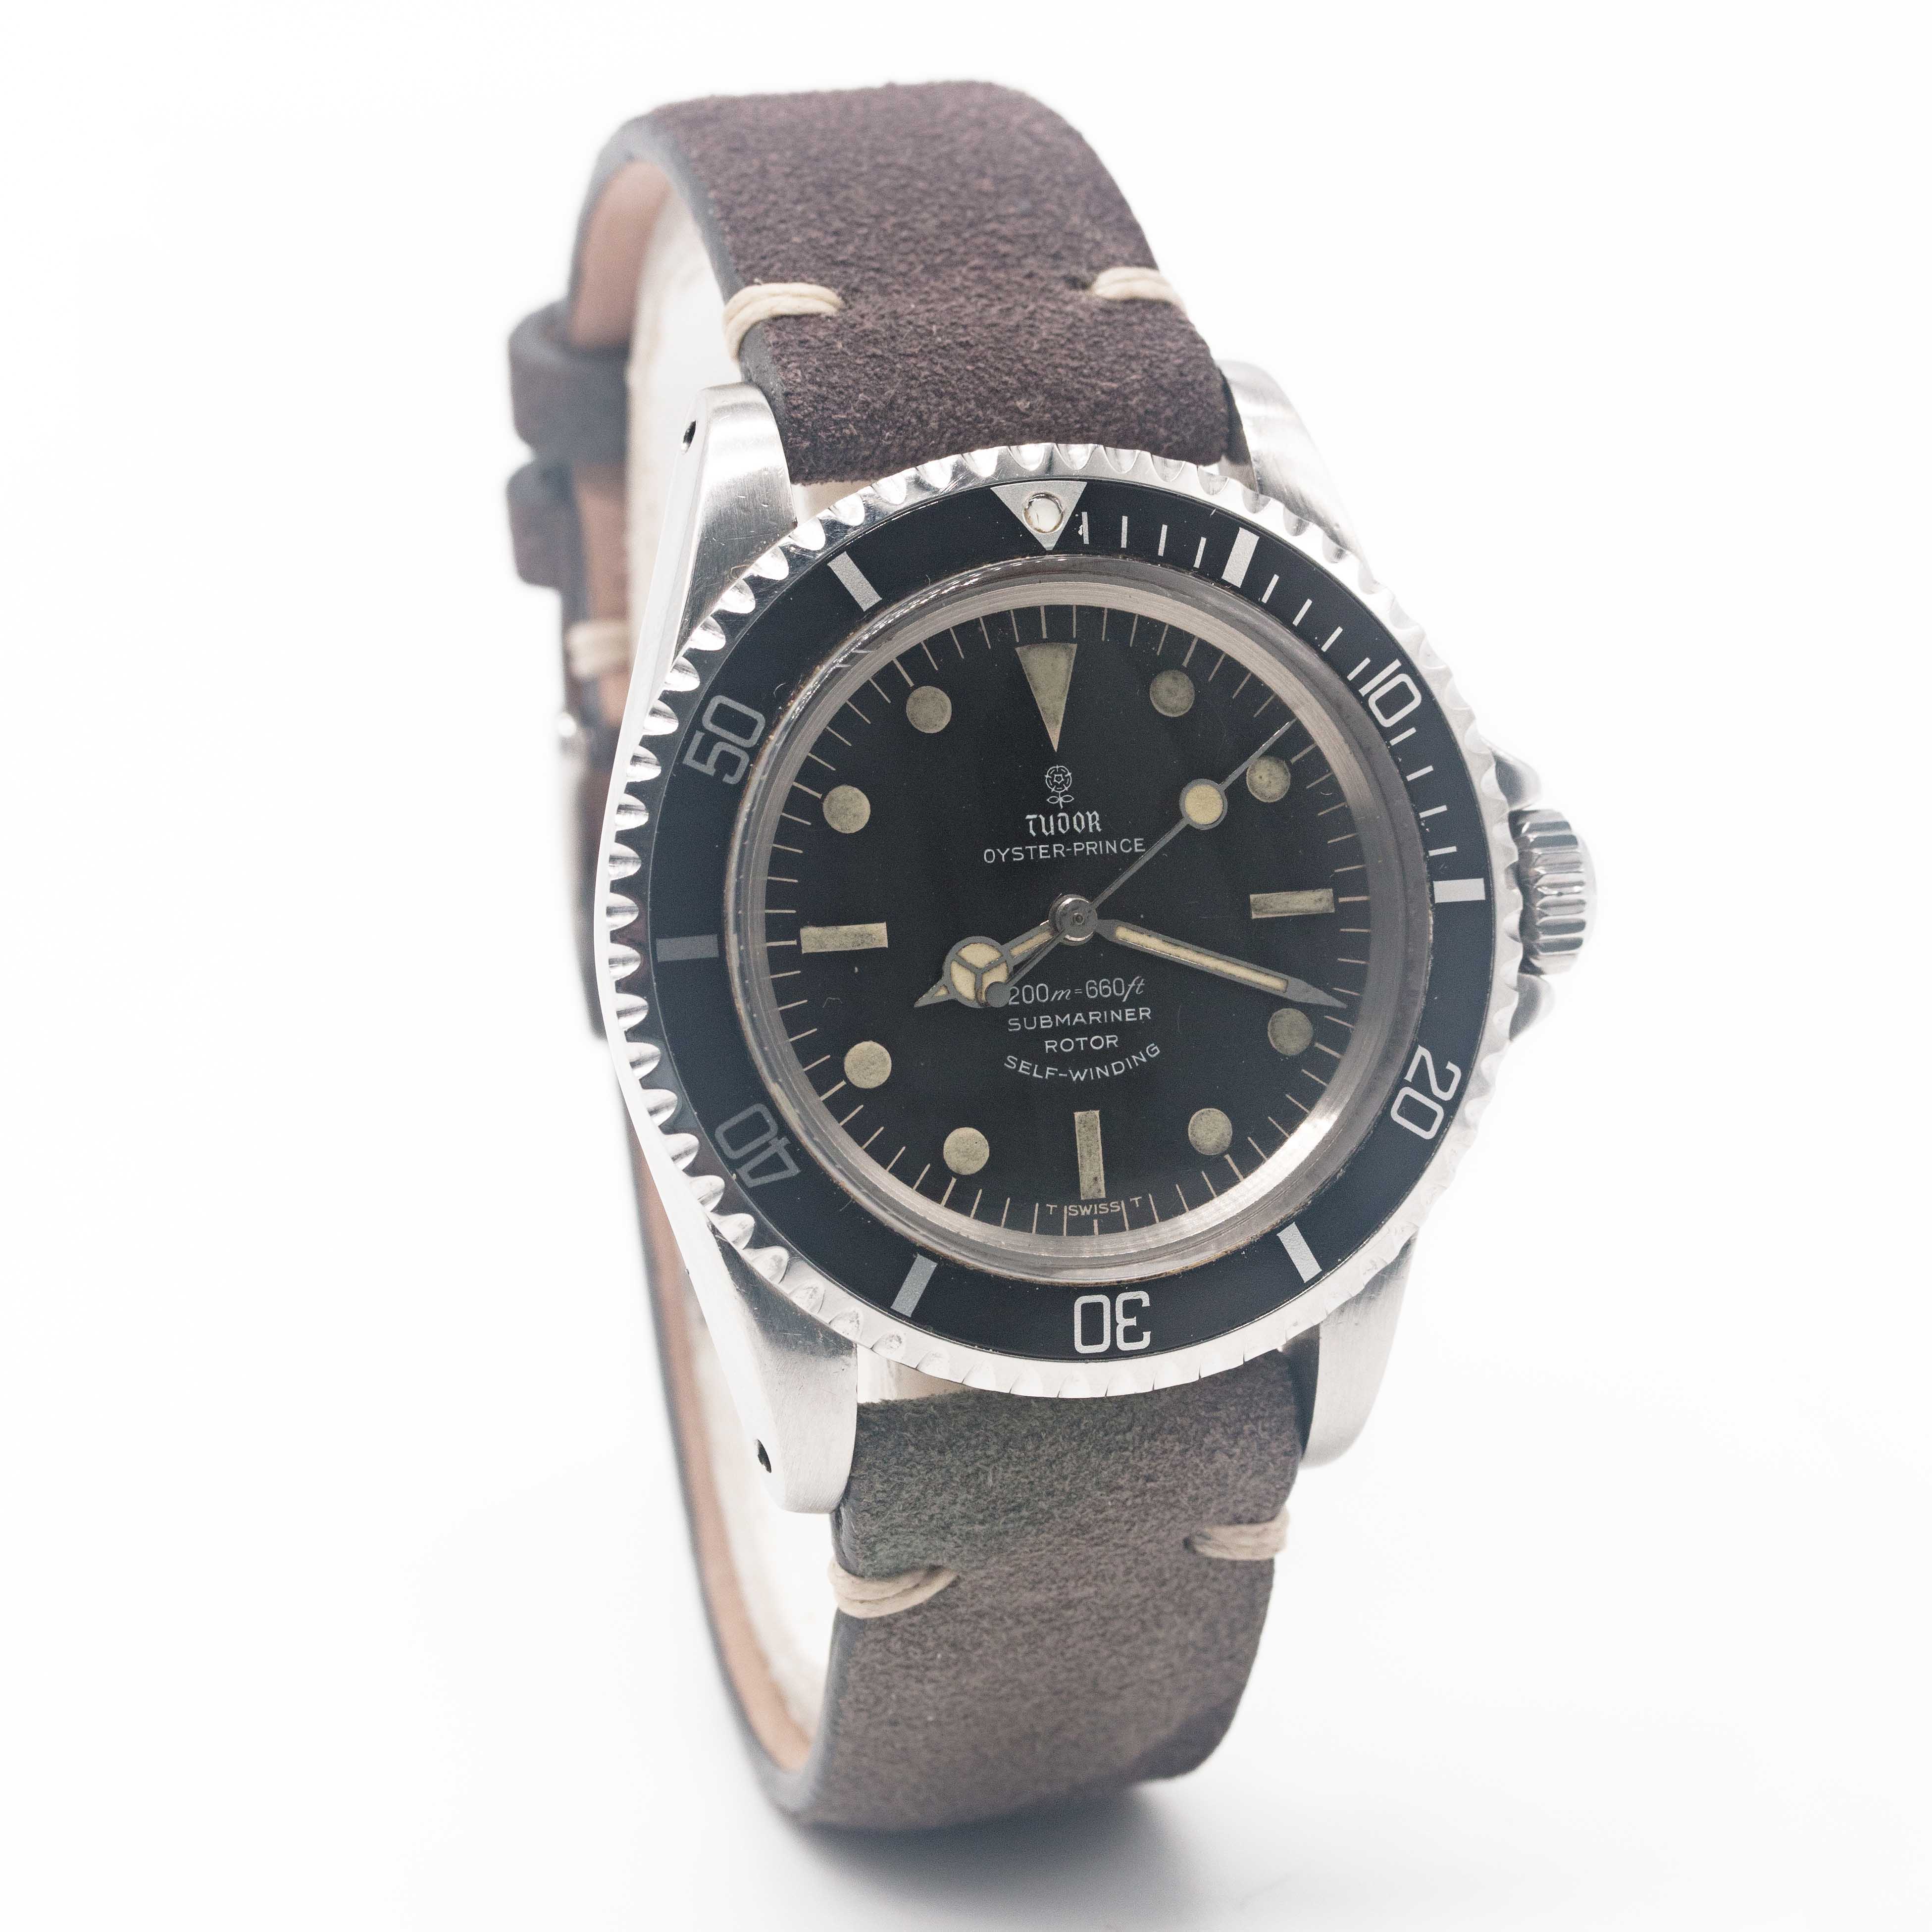 A GENTLEMAN'S STAINLESS STEEL ROLEX TUDOR OYSTER PRINCE SUBMARINER WRIST WATCH CIRCA 1967, REF. - Image 5 of 9